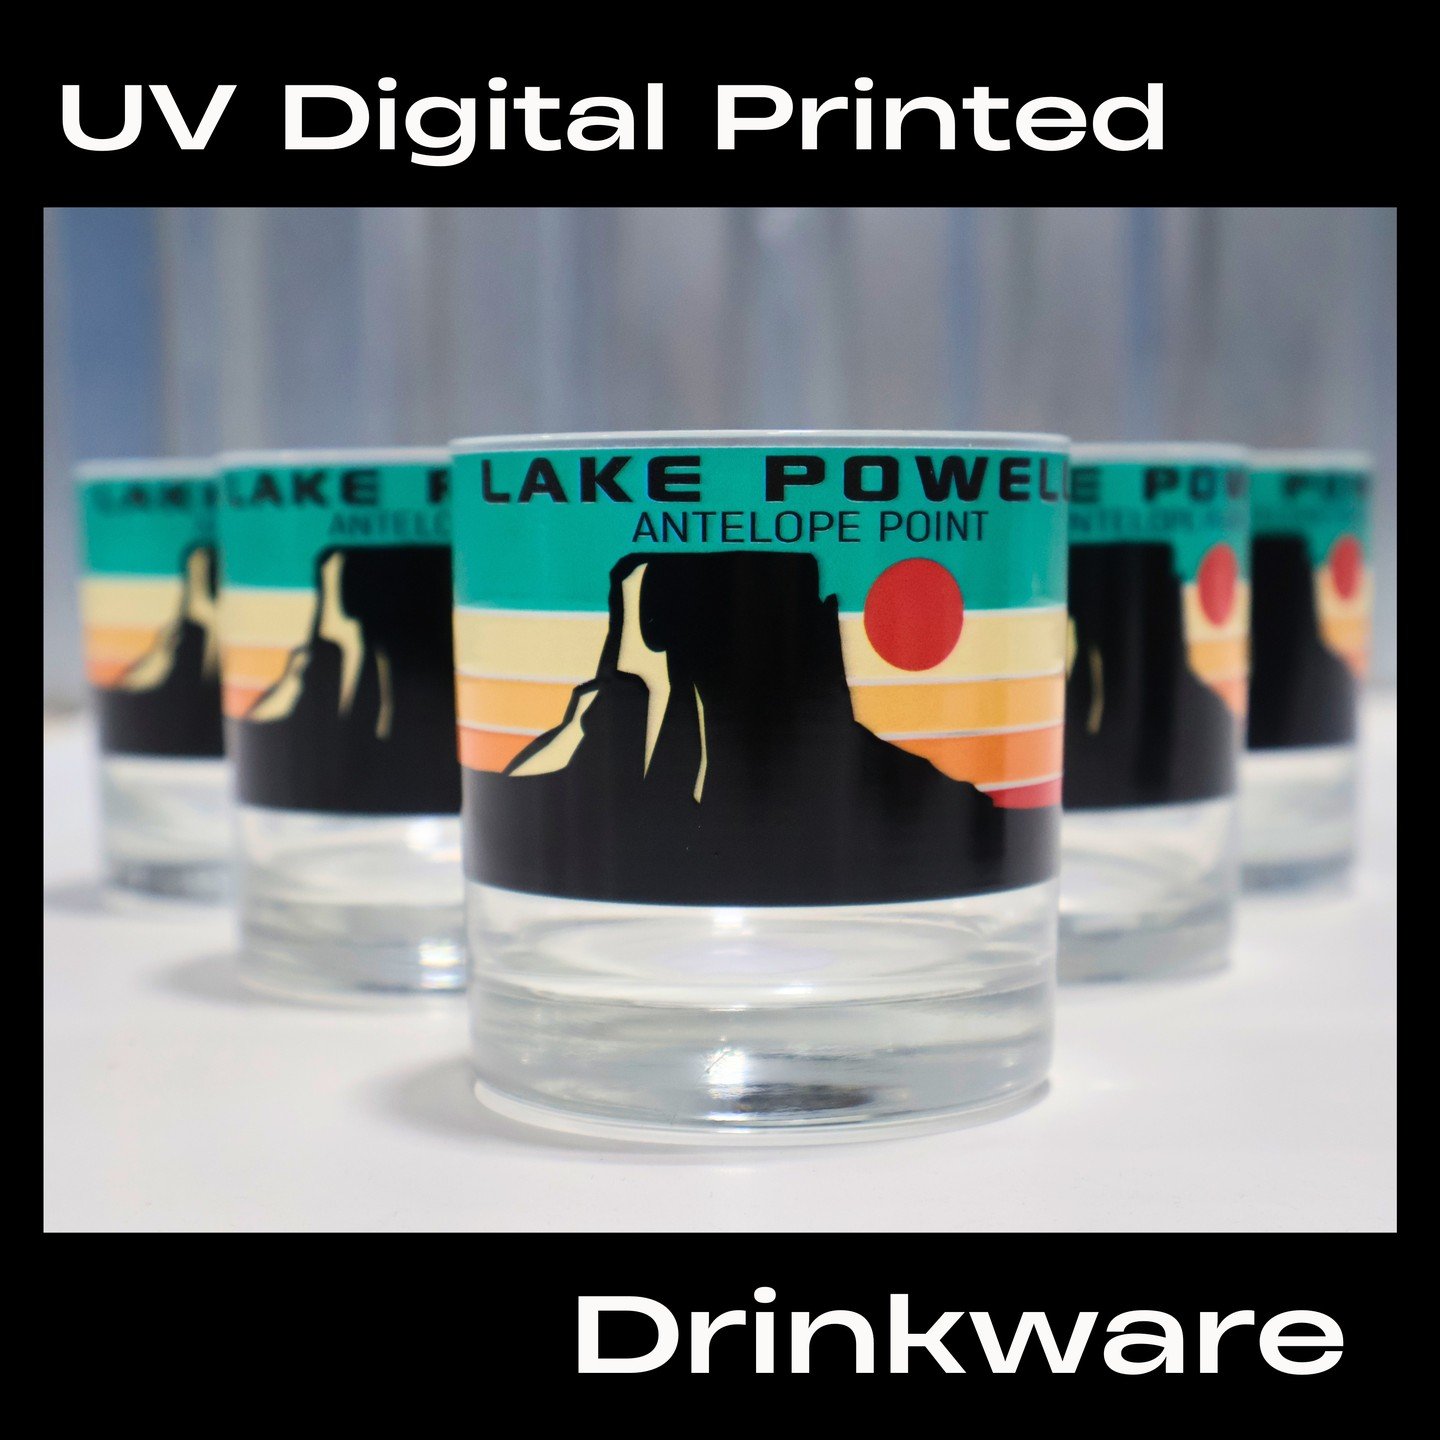 Quench your thirst for unique souvenirs with our UV digital printed drinkware featuring stunning Lake Powell artwork! At Lone Rock Clothing, we're not just about fashion - we're about capturing memories. Our customizable designs can transport you to 